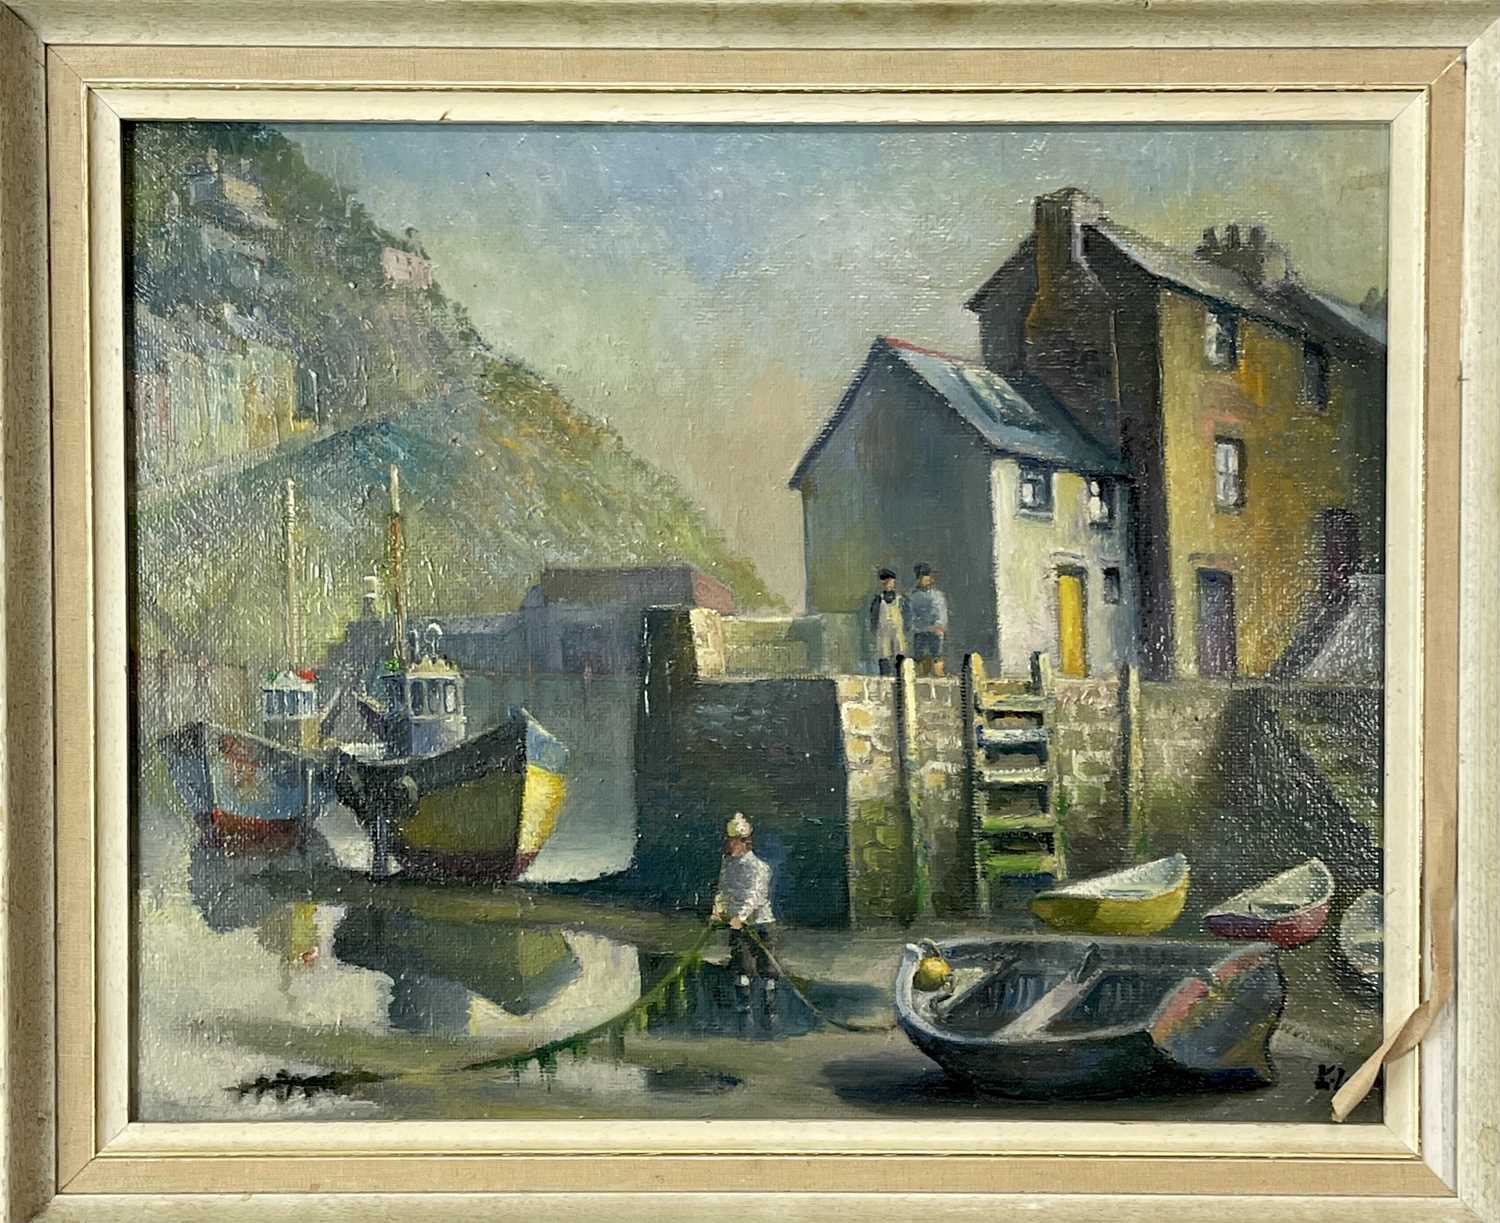 Ken LEECH (XX) Polperro - afternoon in early spring Oil on board Signed and inscribed verso 59 x - Image 3 of 3